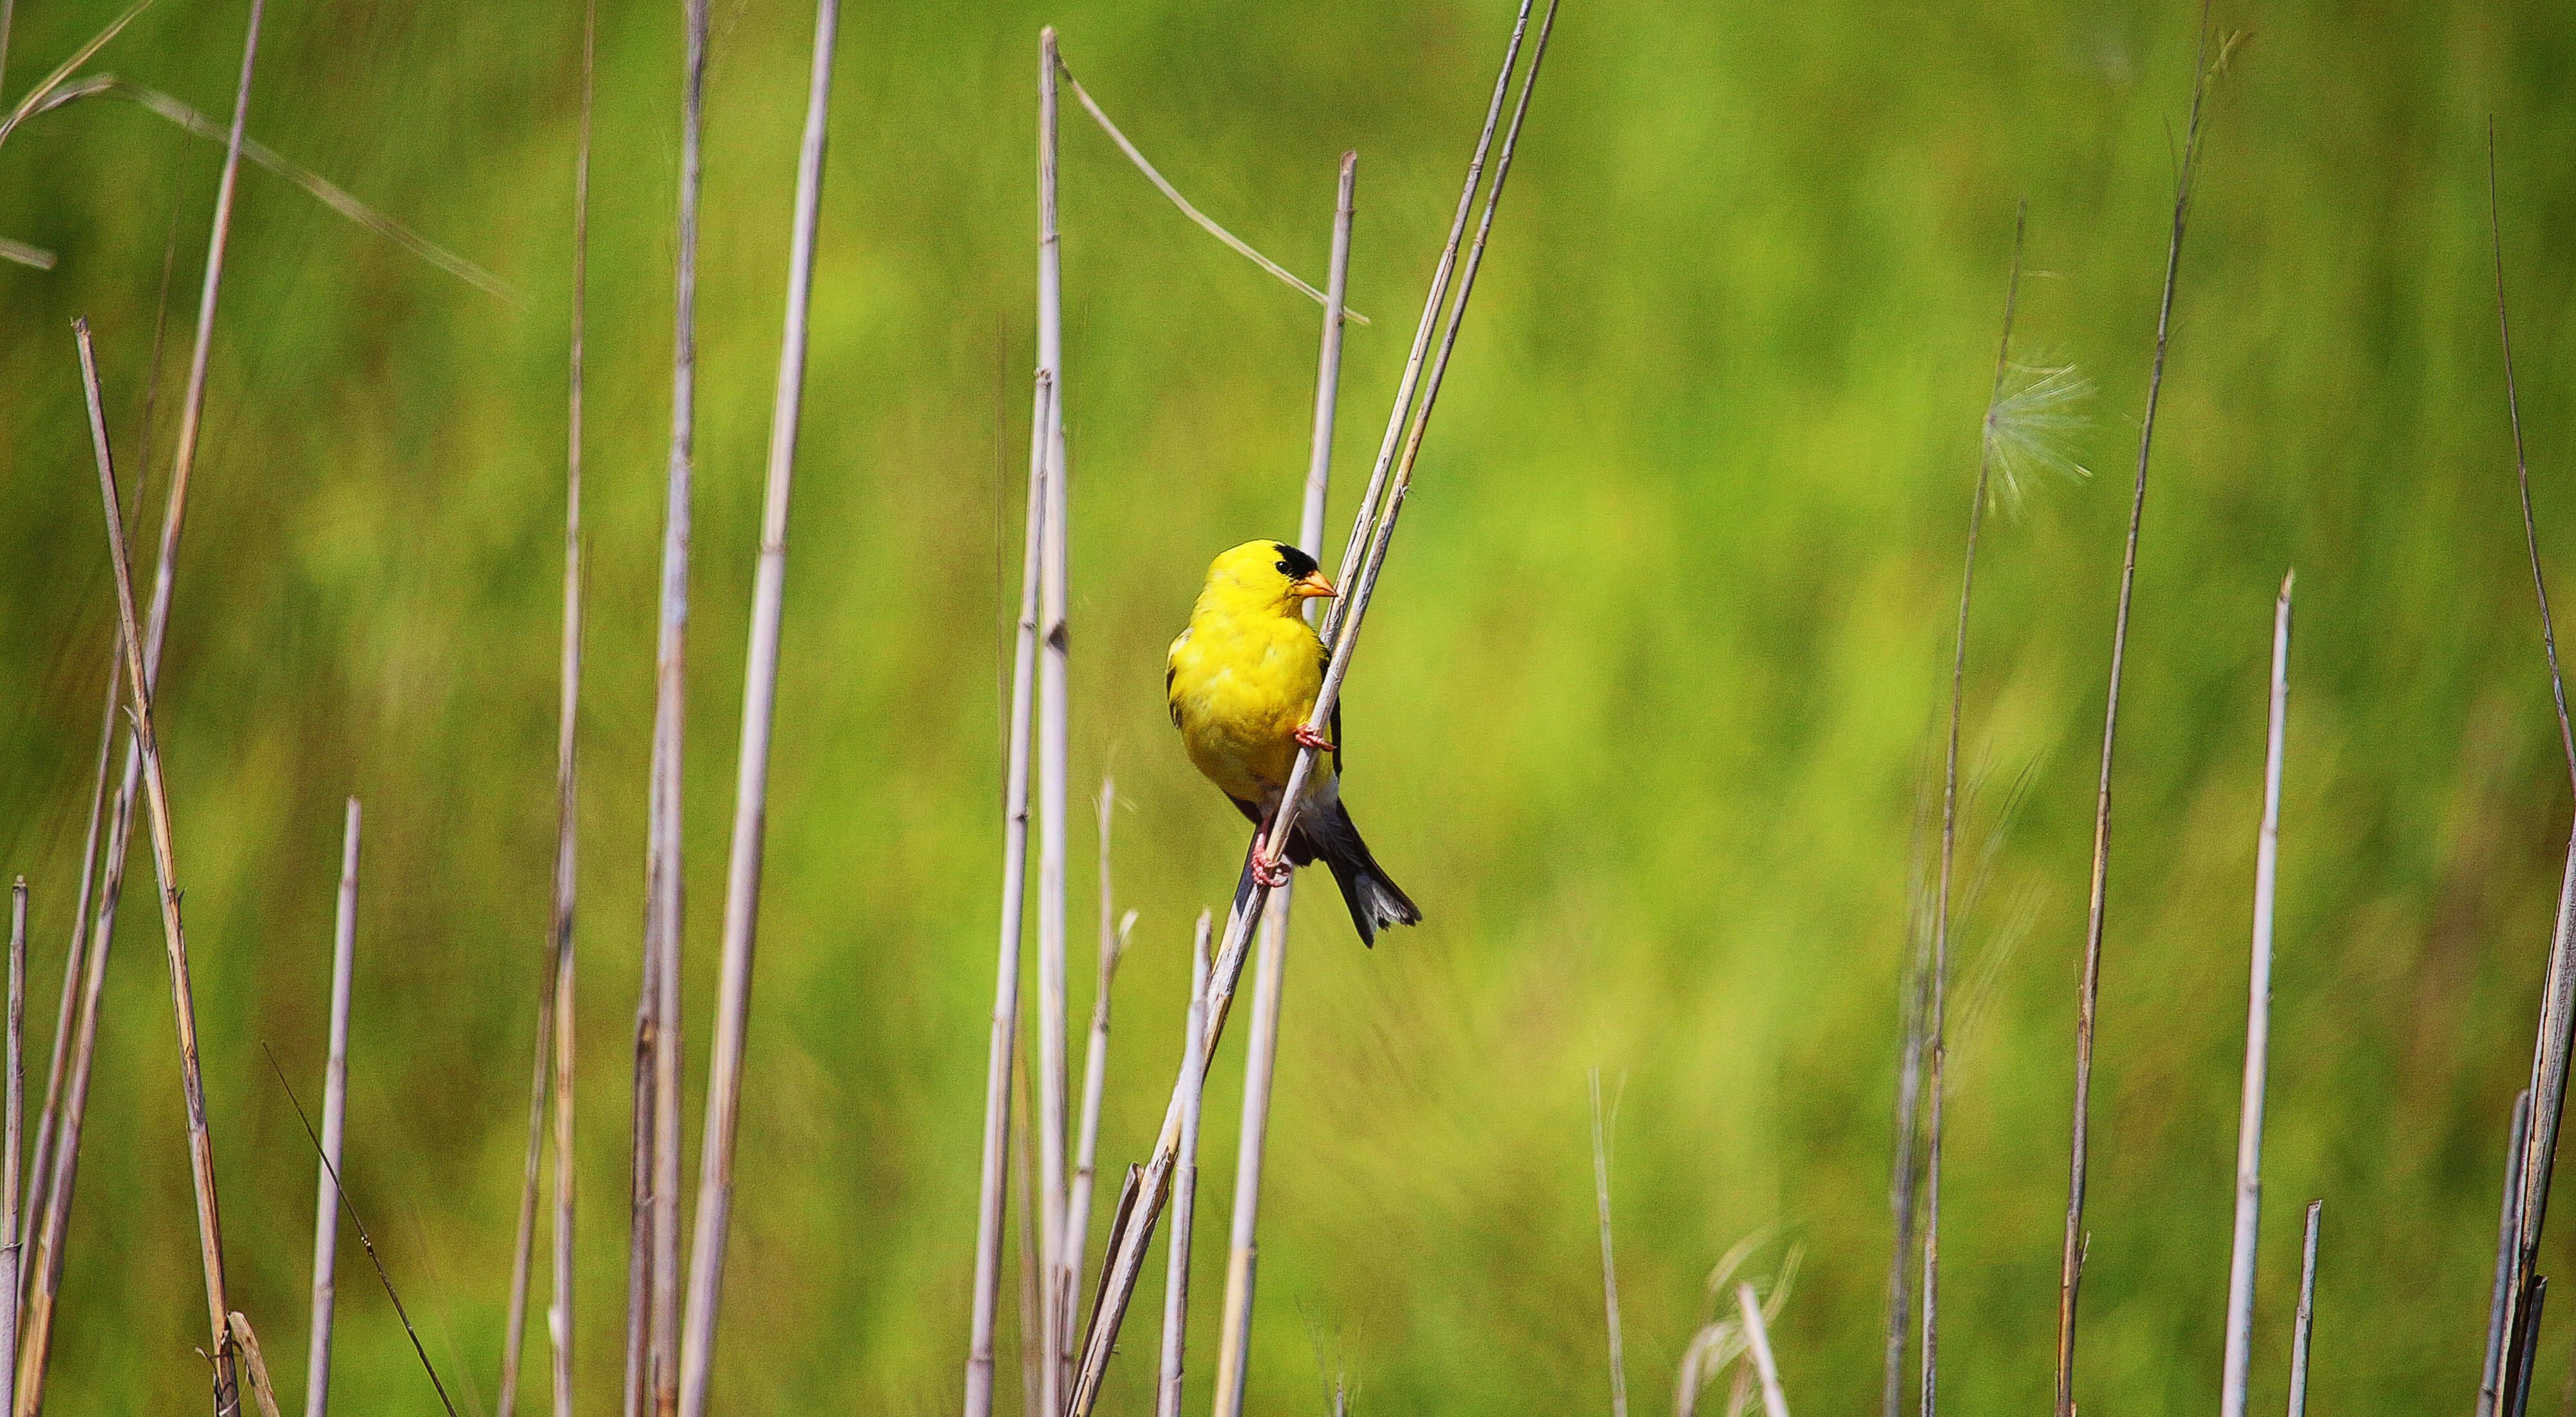 A yellow bird perches on a long thin stalk of marsh grass at a wildlife refuge.